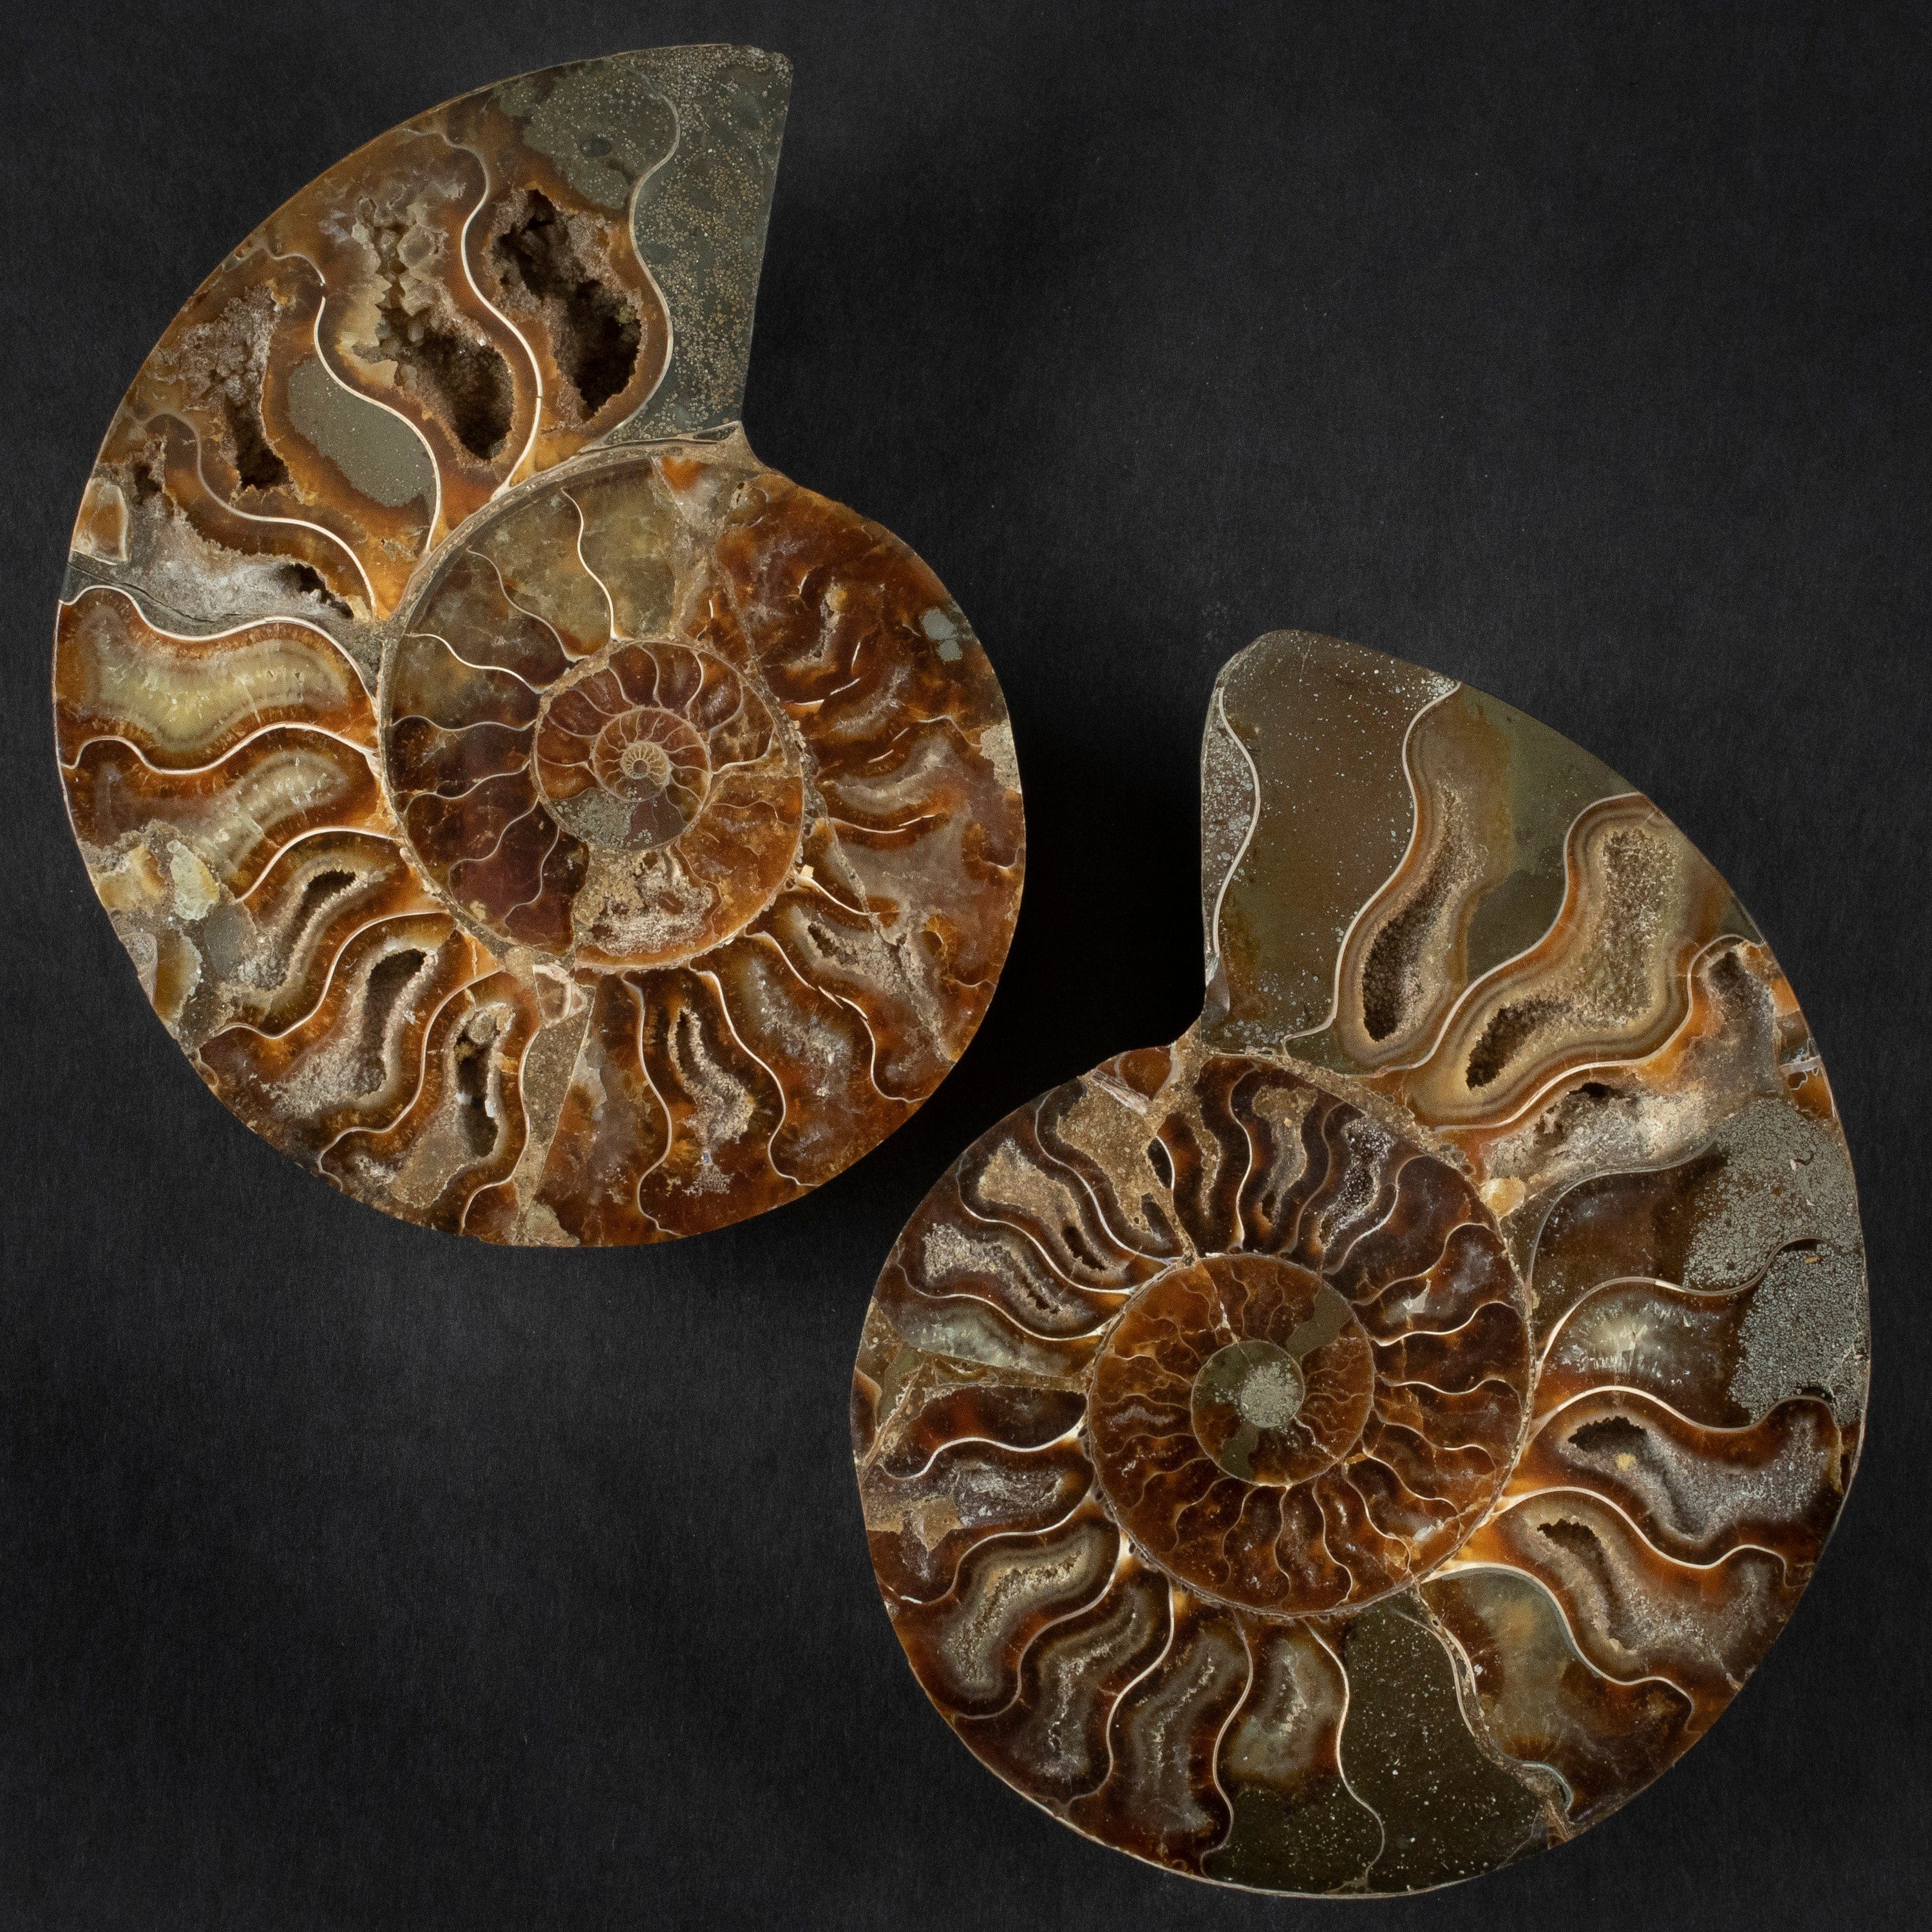 Kalifano Fossils & Minerals Natural Ammonite Pair from Madagascar - 4-6" AMM600